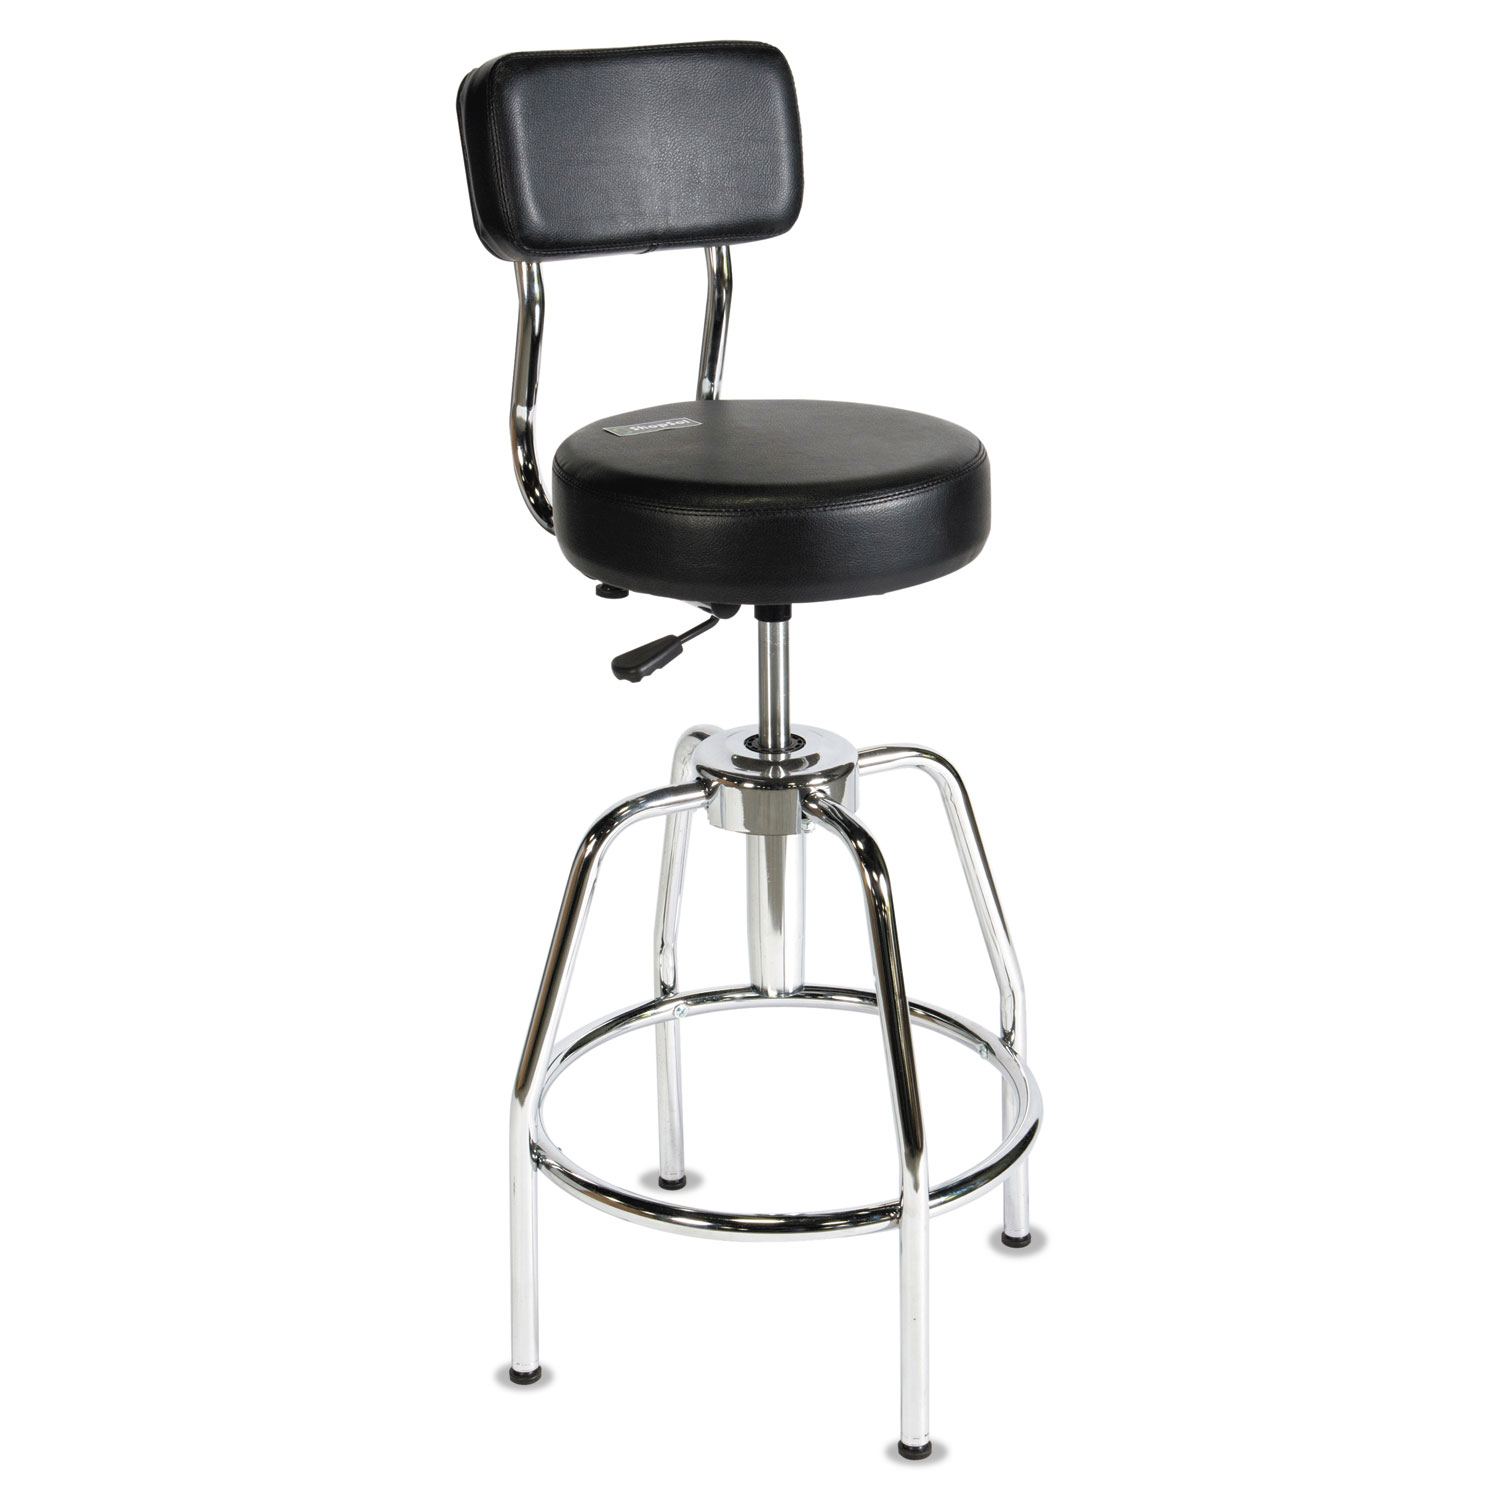  ShopSol 3010002 Heavy-Duty Shop Stool, 34 Seat Height, Supports up to 300 lbs., Black Seat/Black Back, Chrome Base (SSX3010002) 